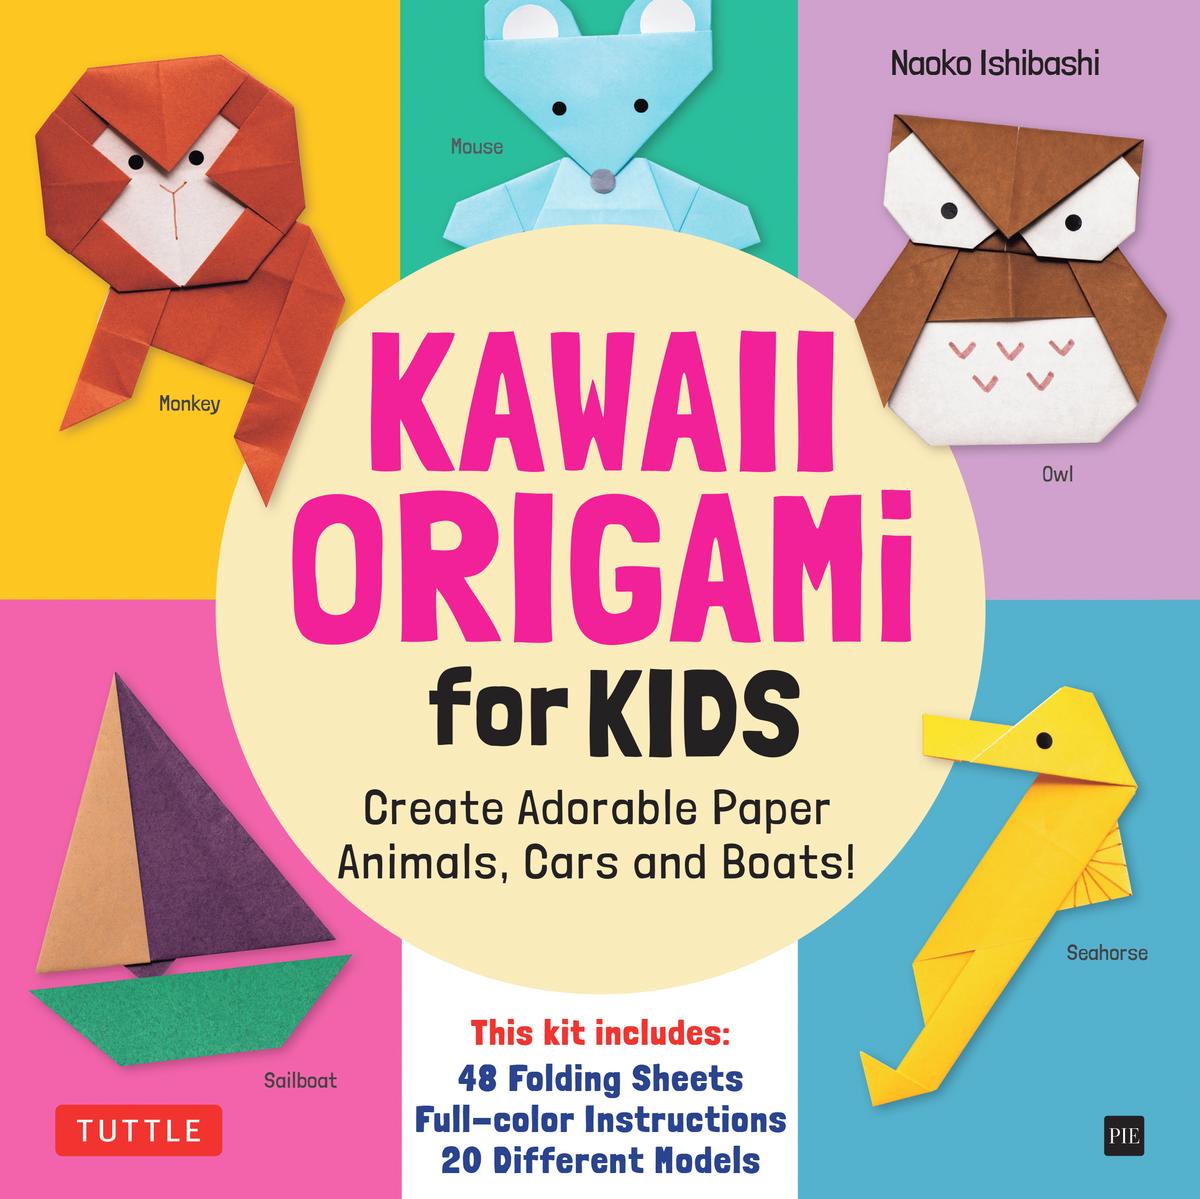 Kawaii Origami for Kids Kit - Create Adorable Paper Animals, Cars and Boats! (Includes 48 folding sheets and full-color instructions)